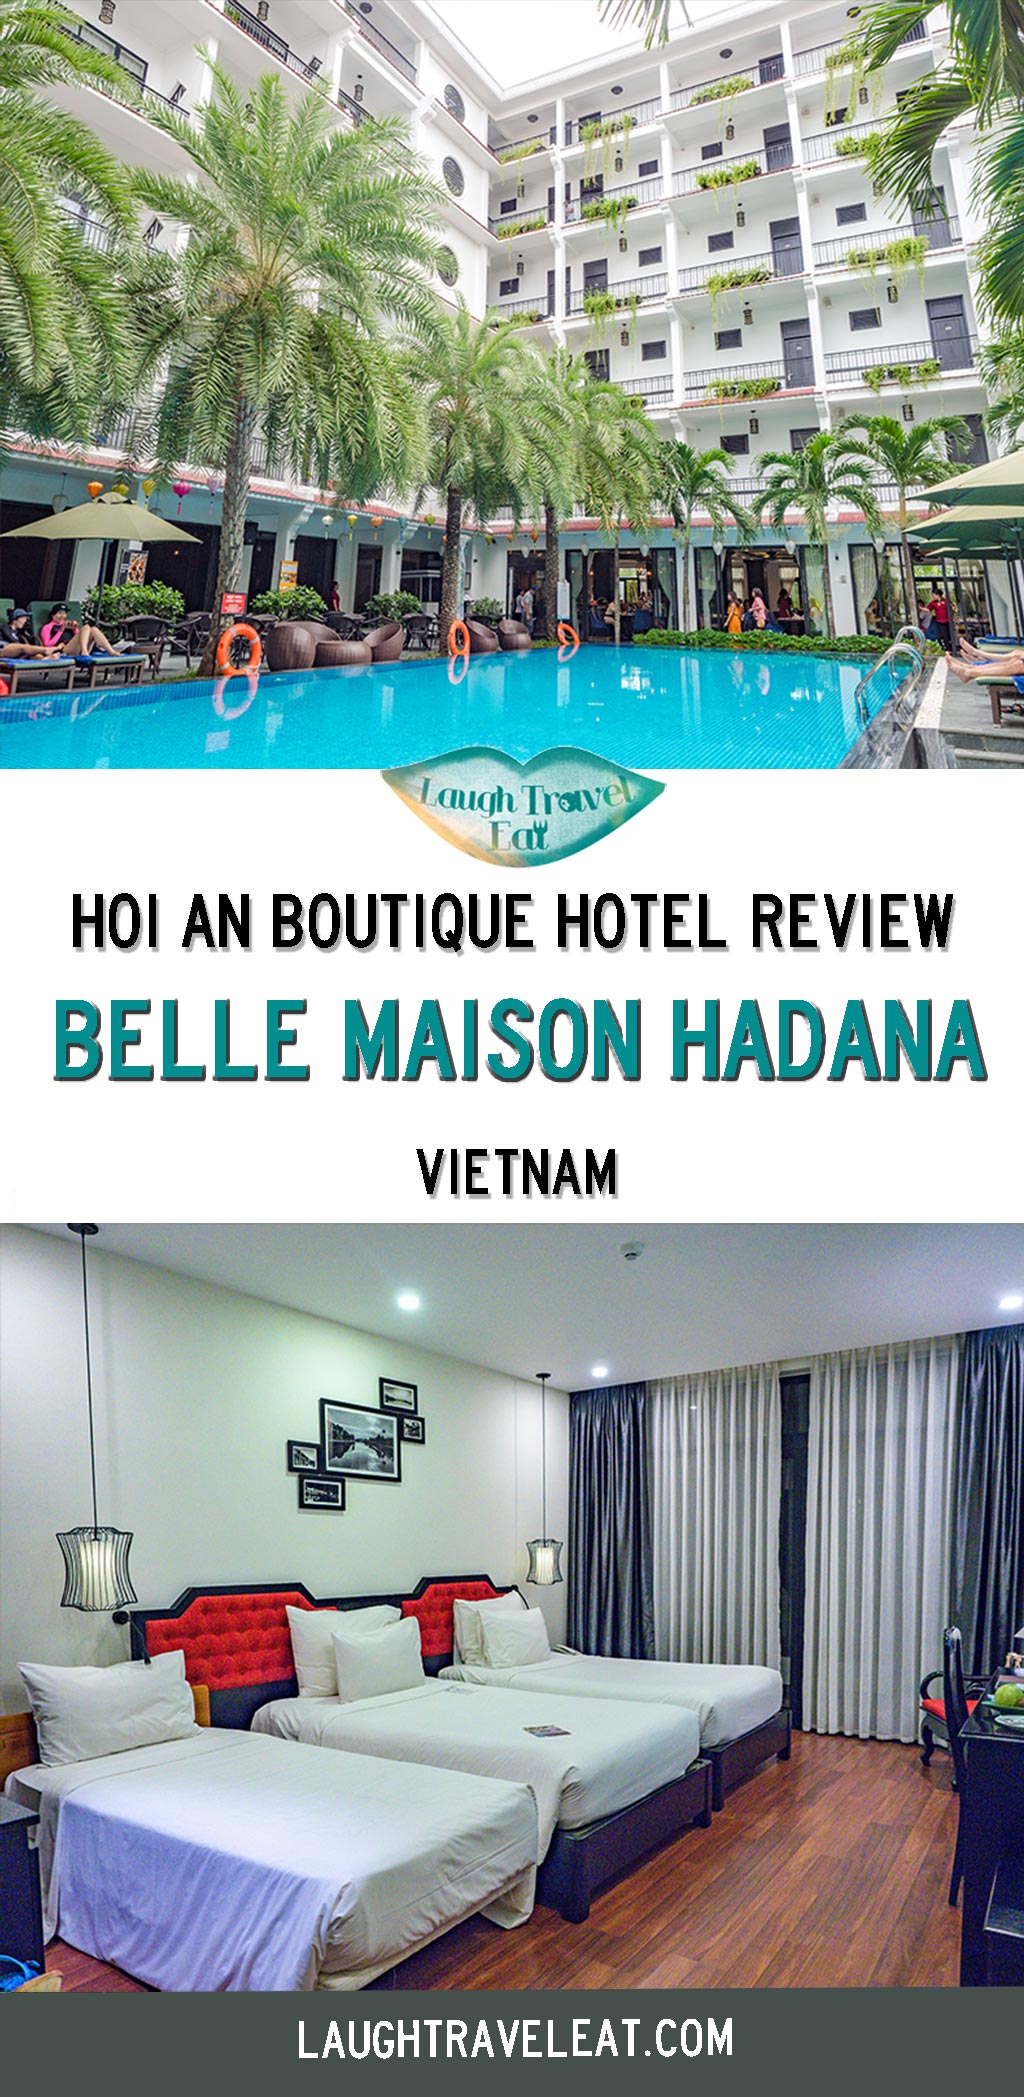 Belle Maison Parosand Danang and Belle Maison Hoi An are great choice for your Central Vietnam trip, here are a review of the hotels: